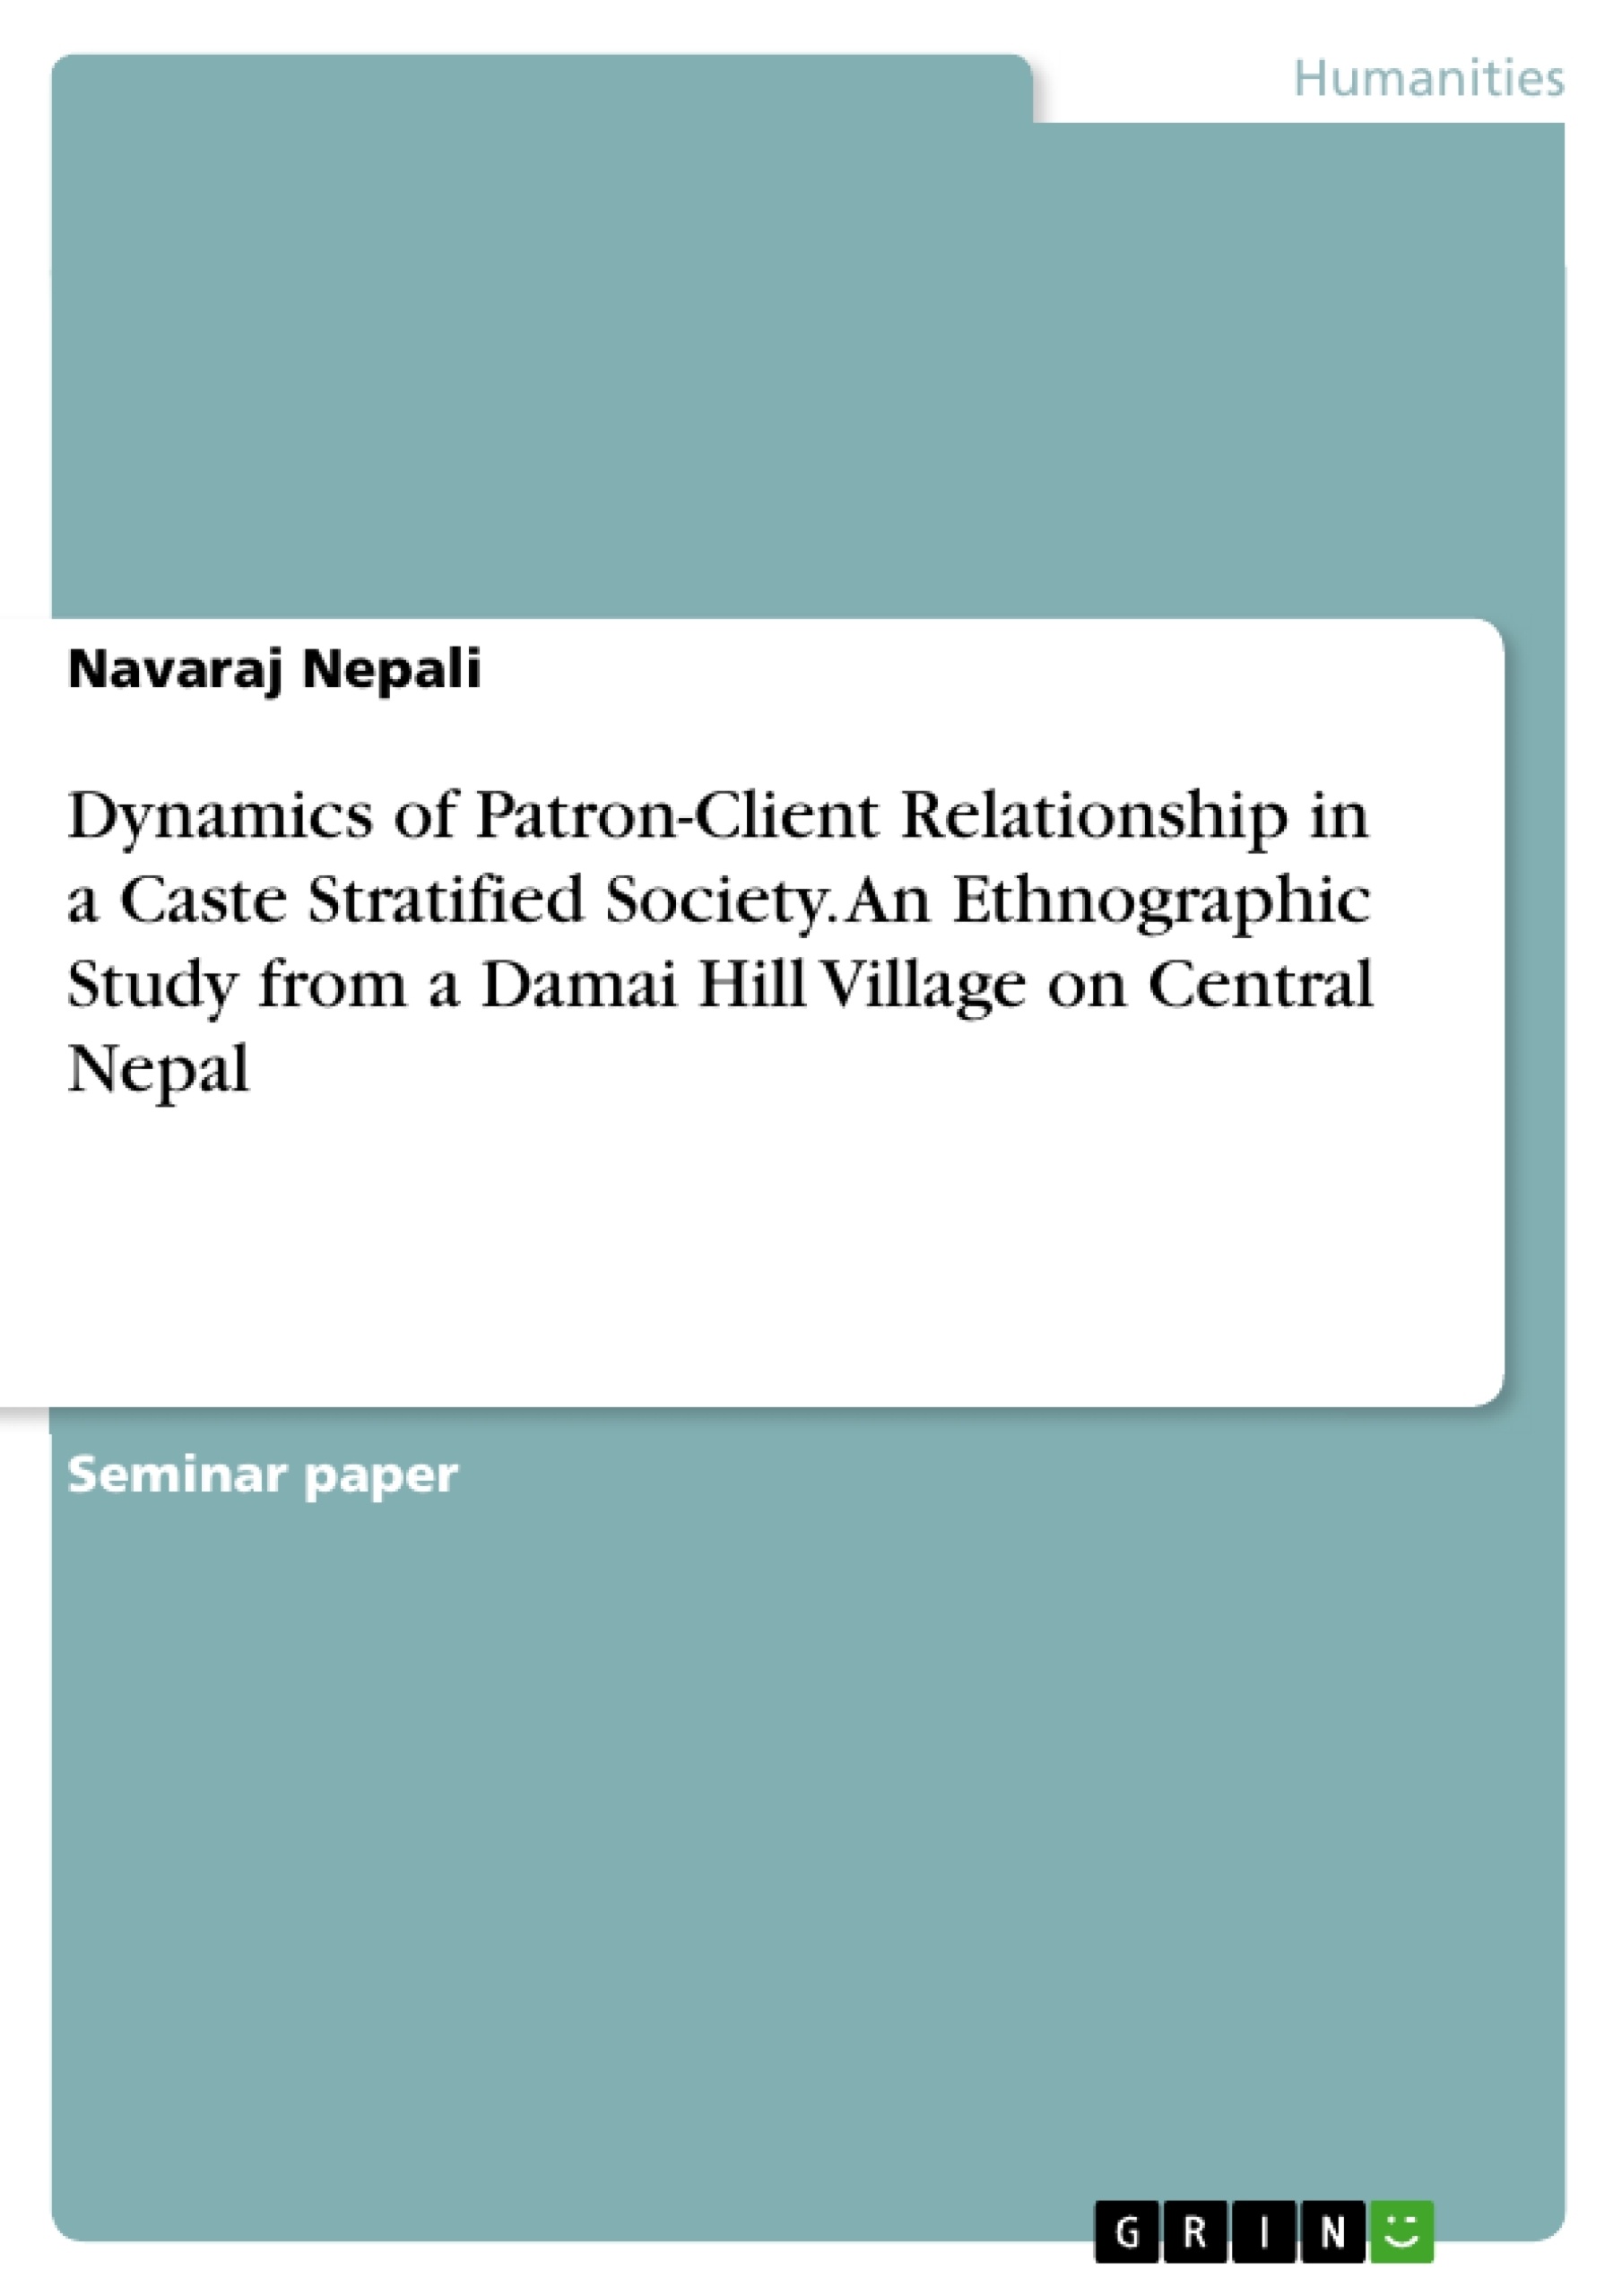 Titre: Dynamics of Patron-Client Relationship in a Caste Stratified Society. An Ethnographic Study from a Damai Hill Village on Central Nepal